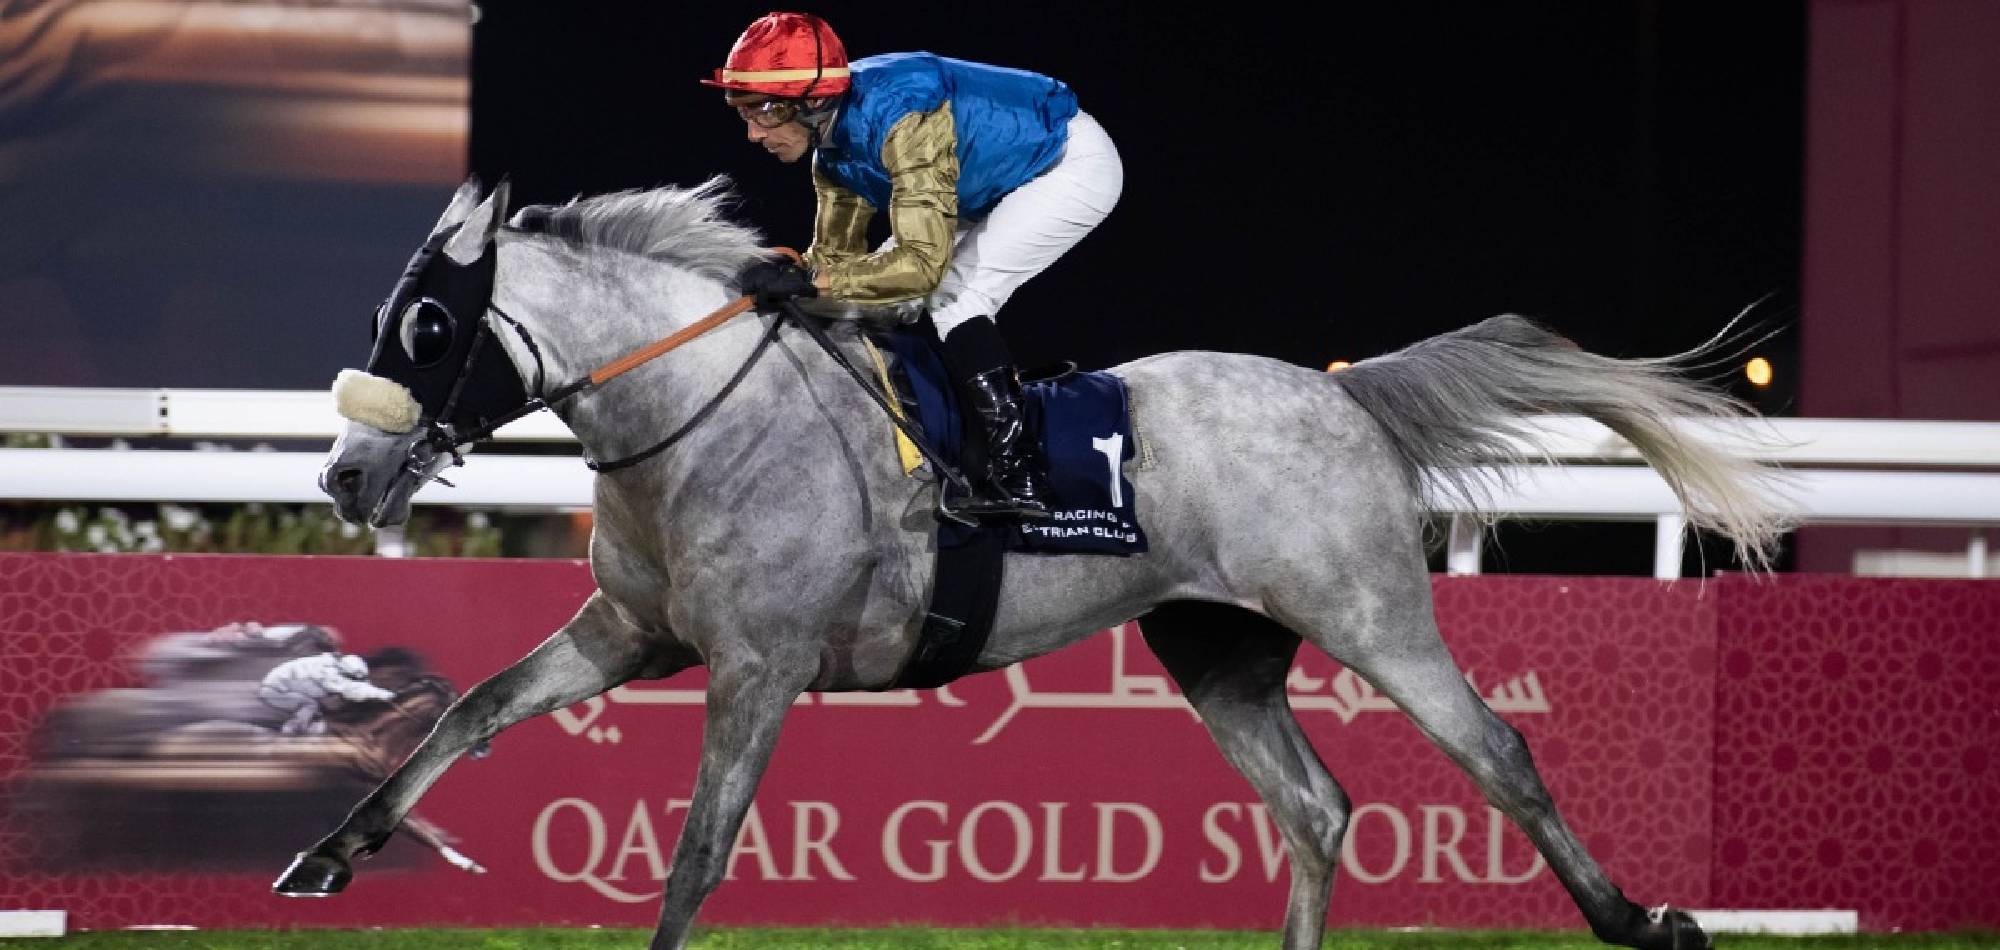 Al Rayyan set to host exciting Qatar Gold Sword and Qatar Gold Trophy races